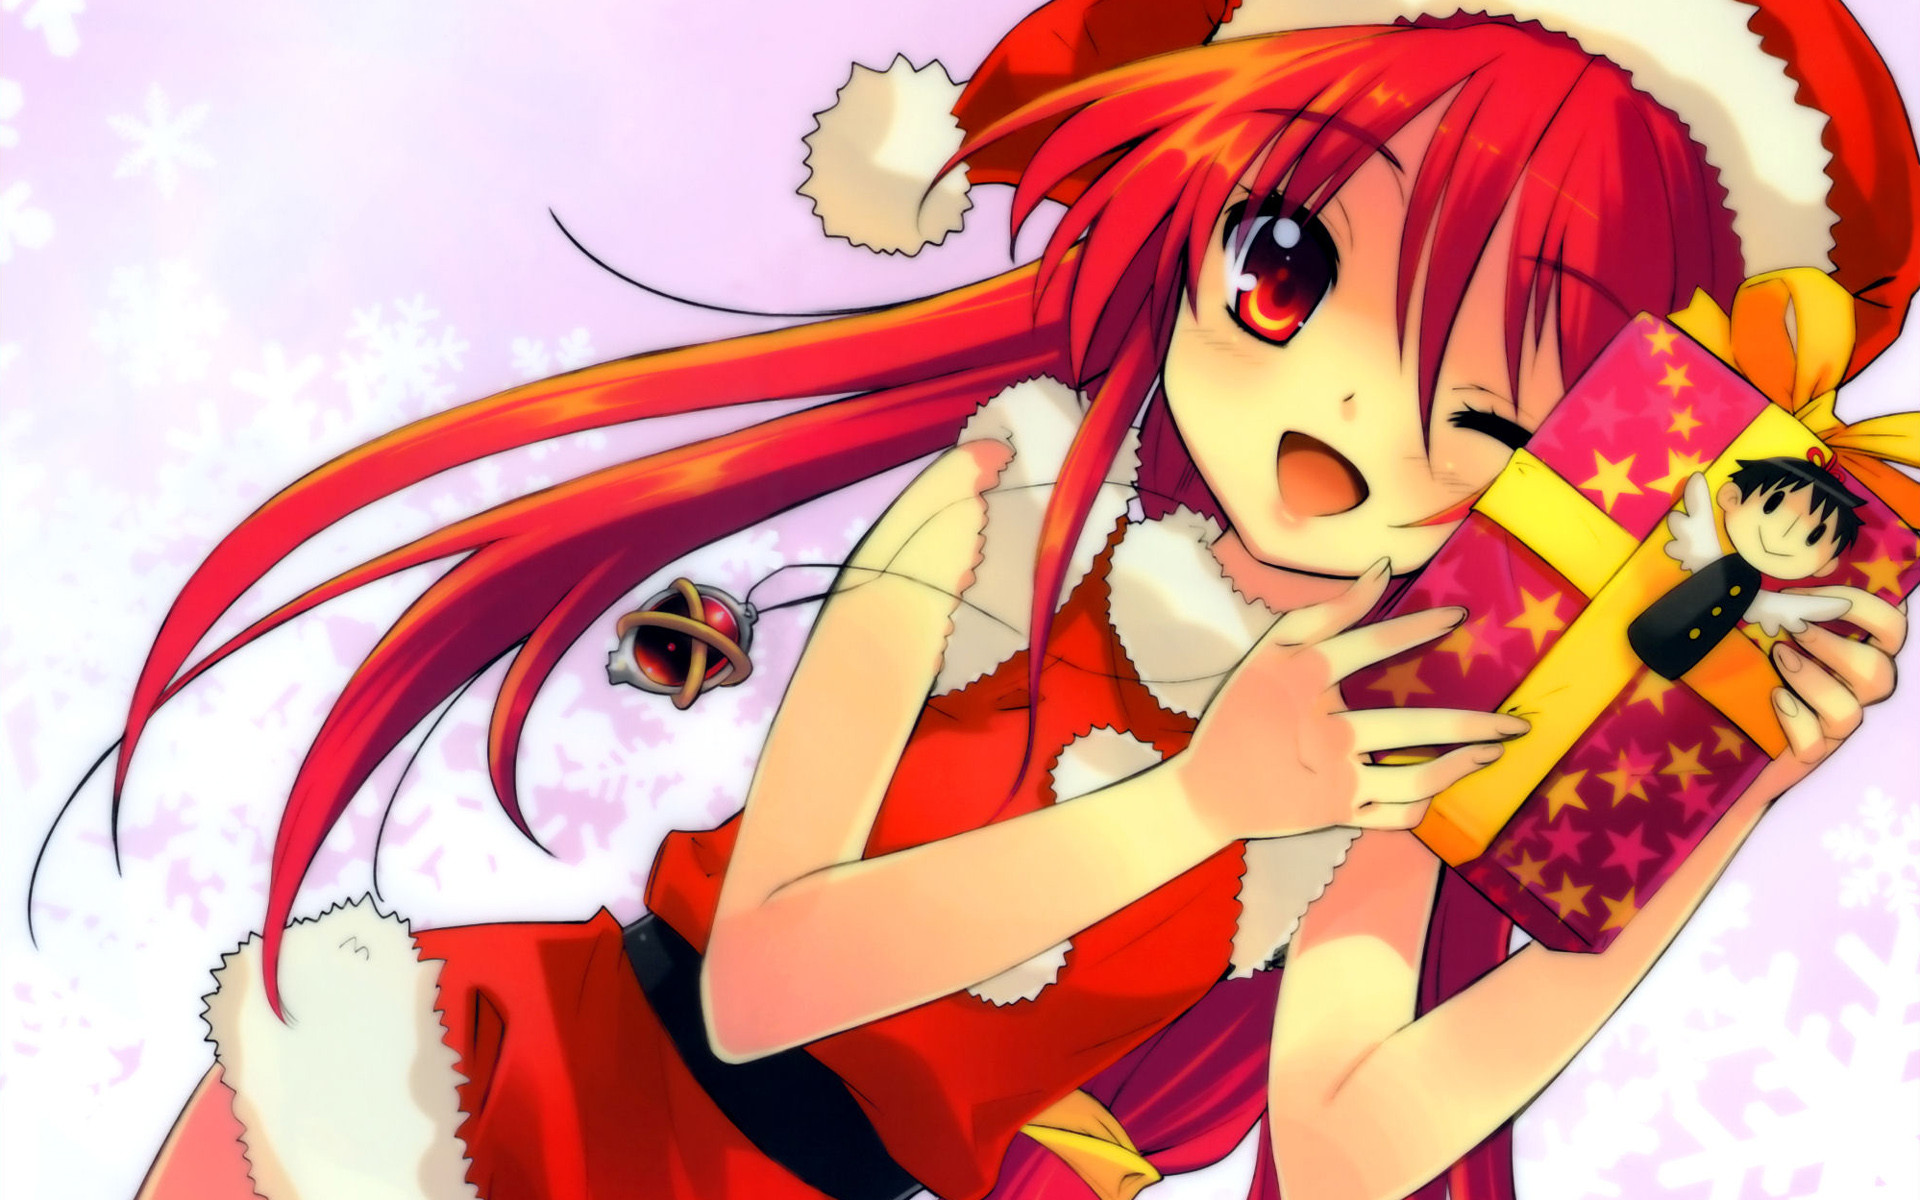 Anime Christmas Girl with Gift widescreen wallpaper Wide Wallpapers.NET